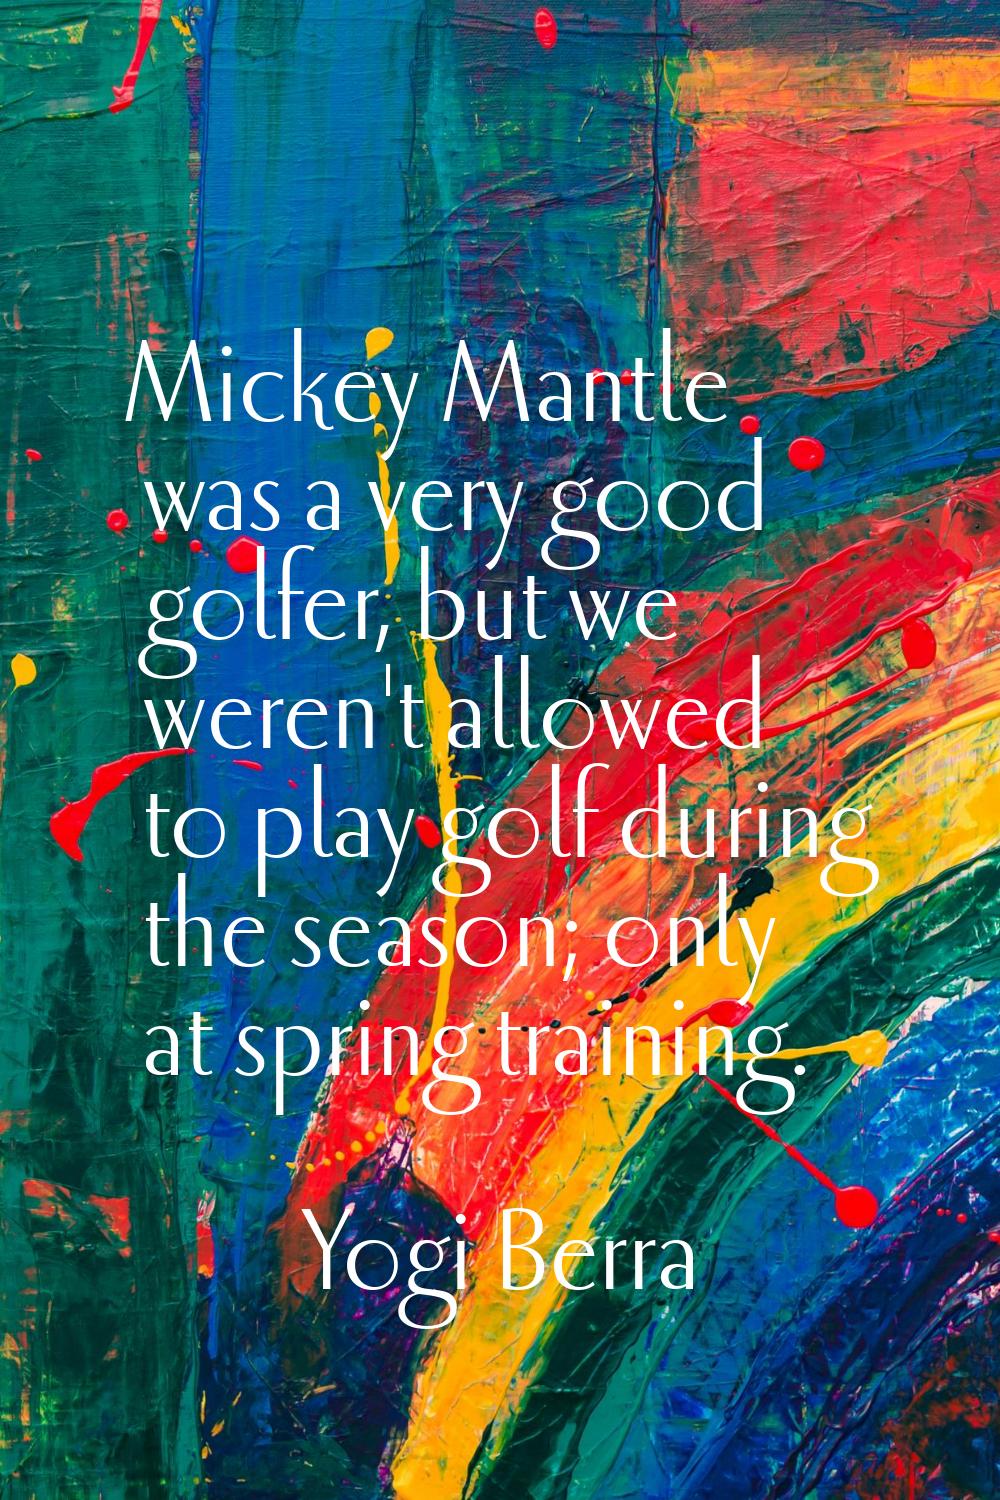 Mickey Mantle was a very good golfer, but we weren't allowed to play golf during the season; only a